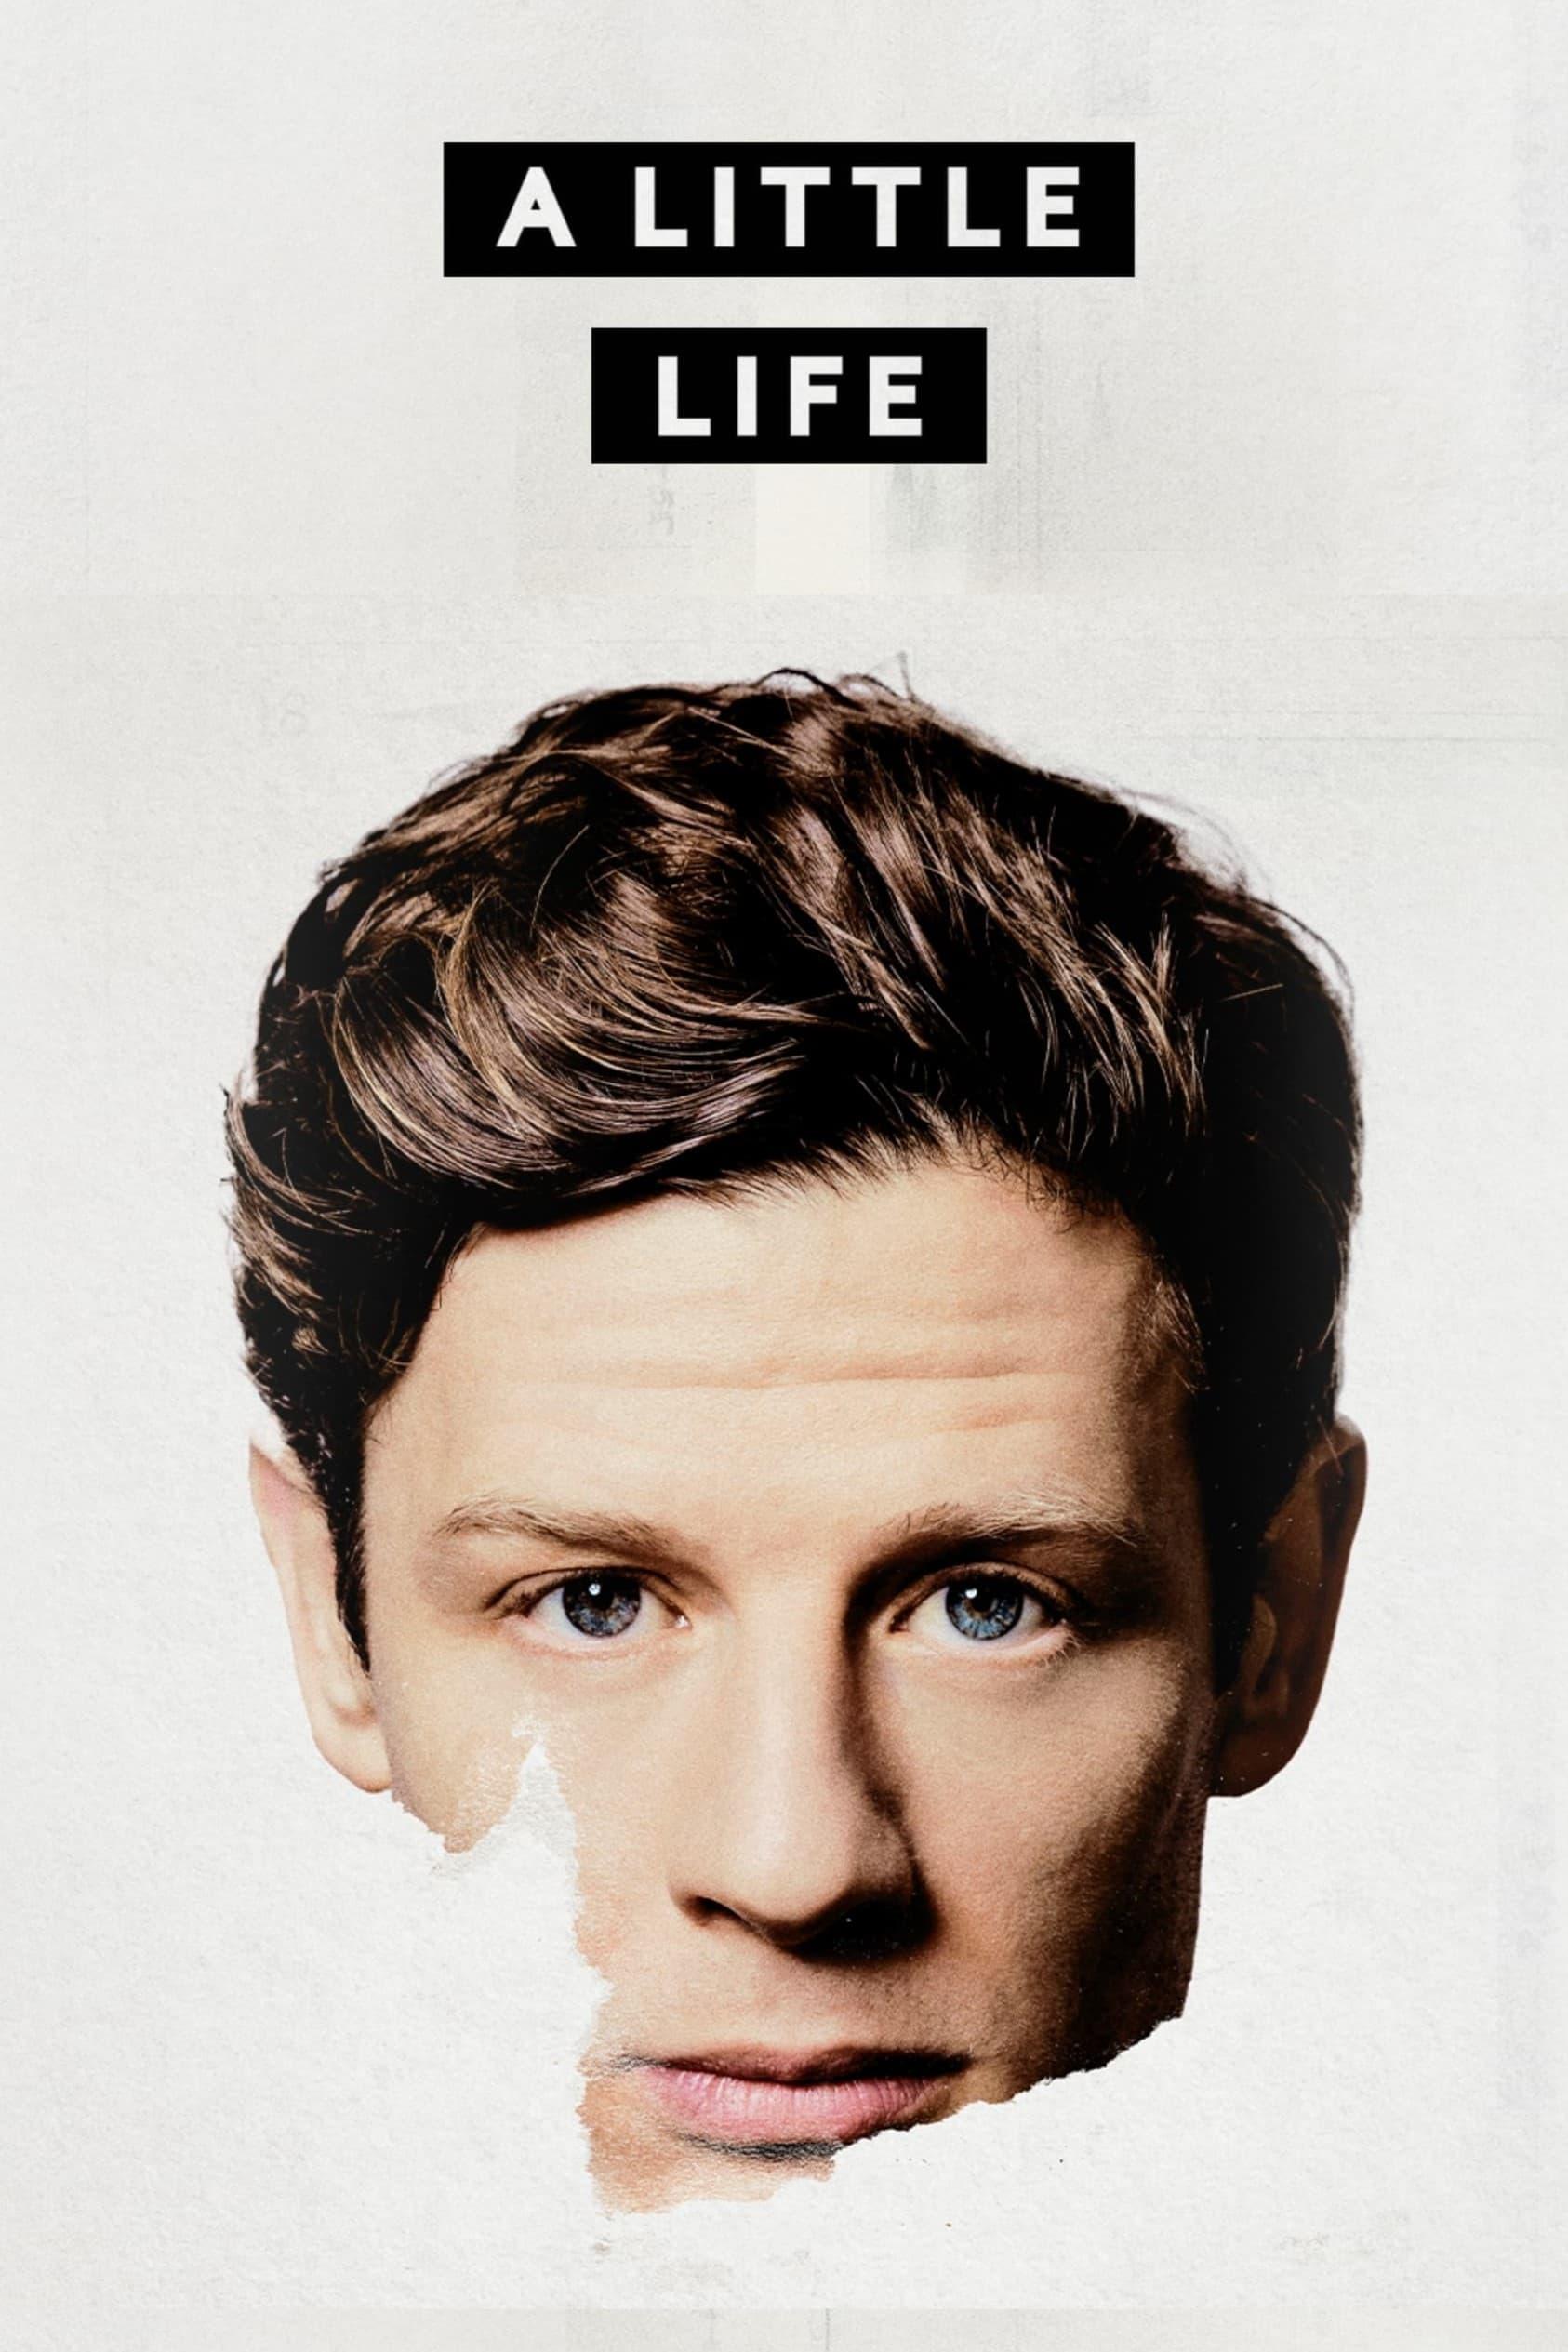 A Little Life poster